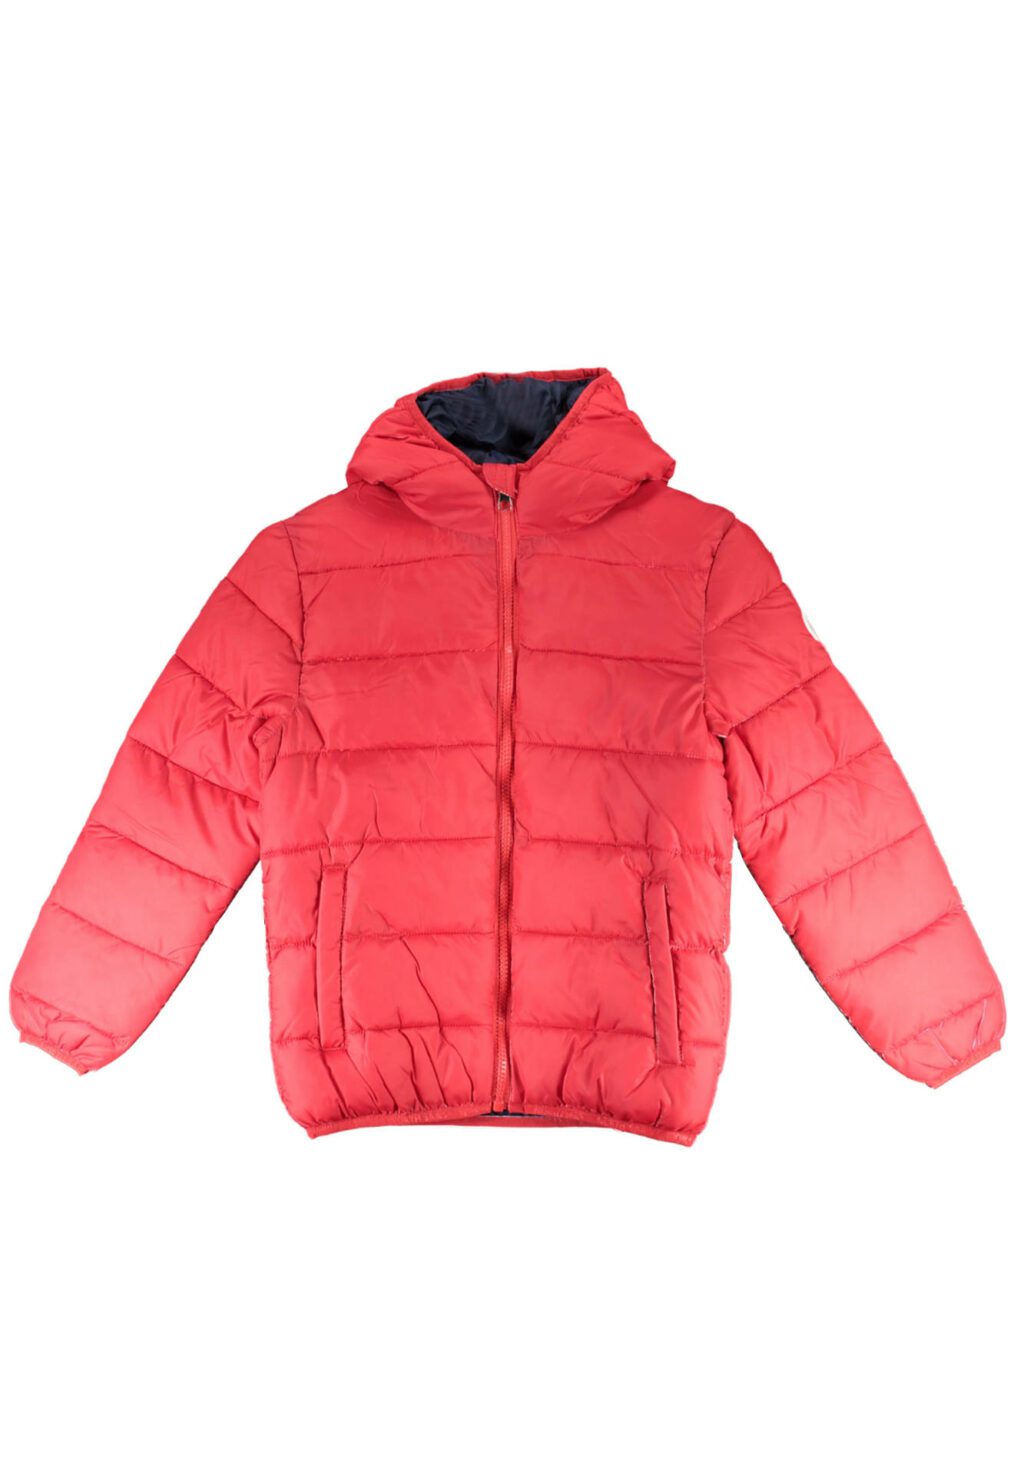 NORTH SAILS RED KIDS JACKET 901194-000_ROSSO_0236